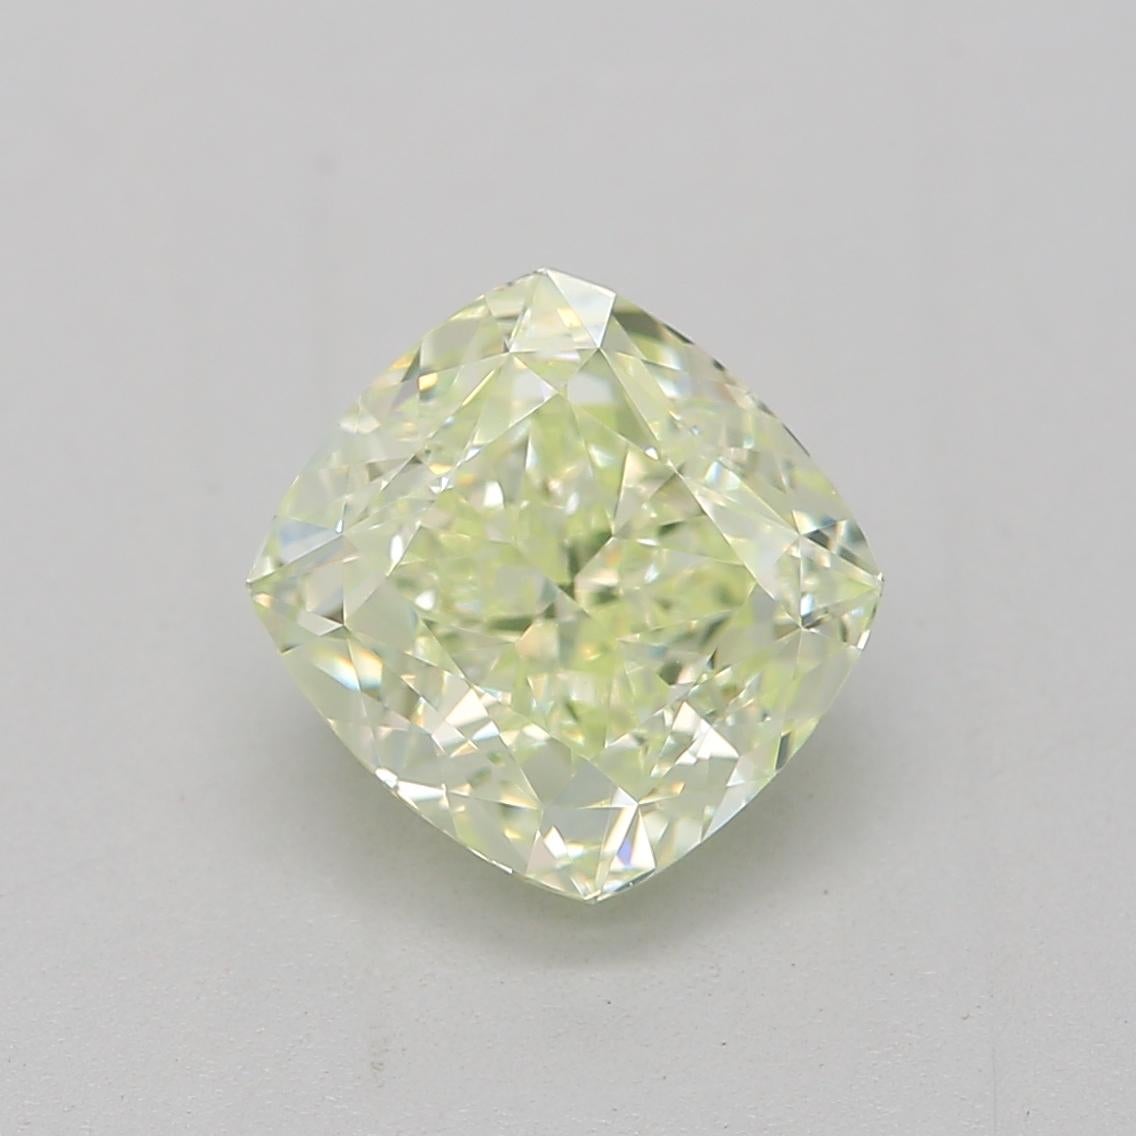 **100% NATURAL FANCY COLOUR DIAMOND**

✪ Diamond Details ✪

➛ Shape: Cushion
➛ Colour Grade: Fancy Light Yellow Green
➛ Carat: 1.00
➛ Clarity: IF
➛ GIA Certified 

^FEATURES OF THE DIAMOND^

This 1 carat cushion cut diamond is a square or